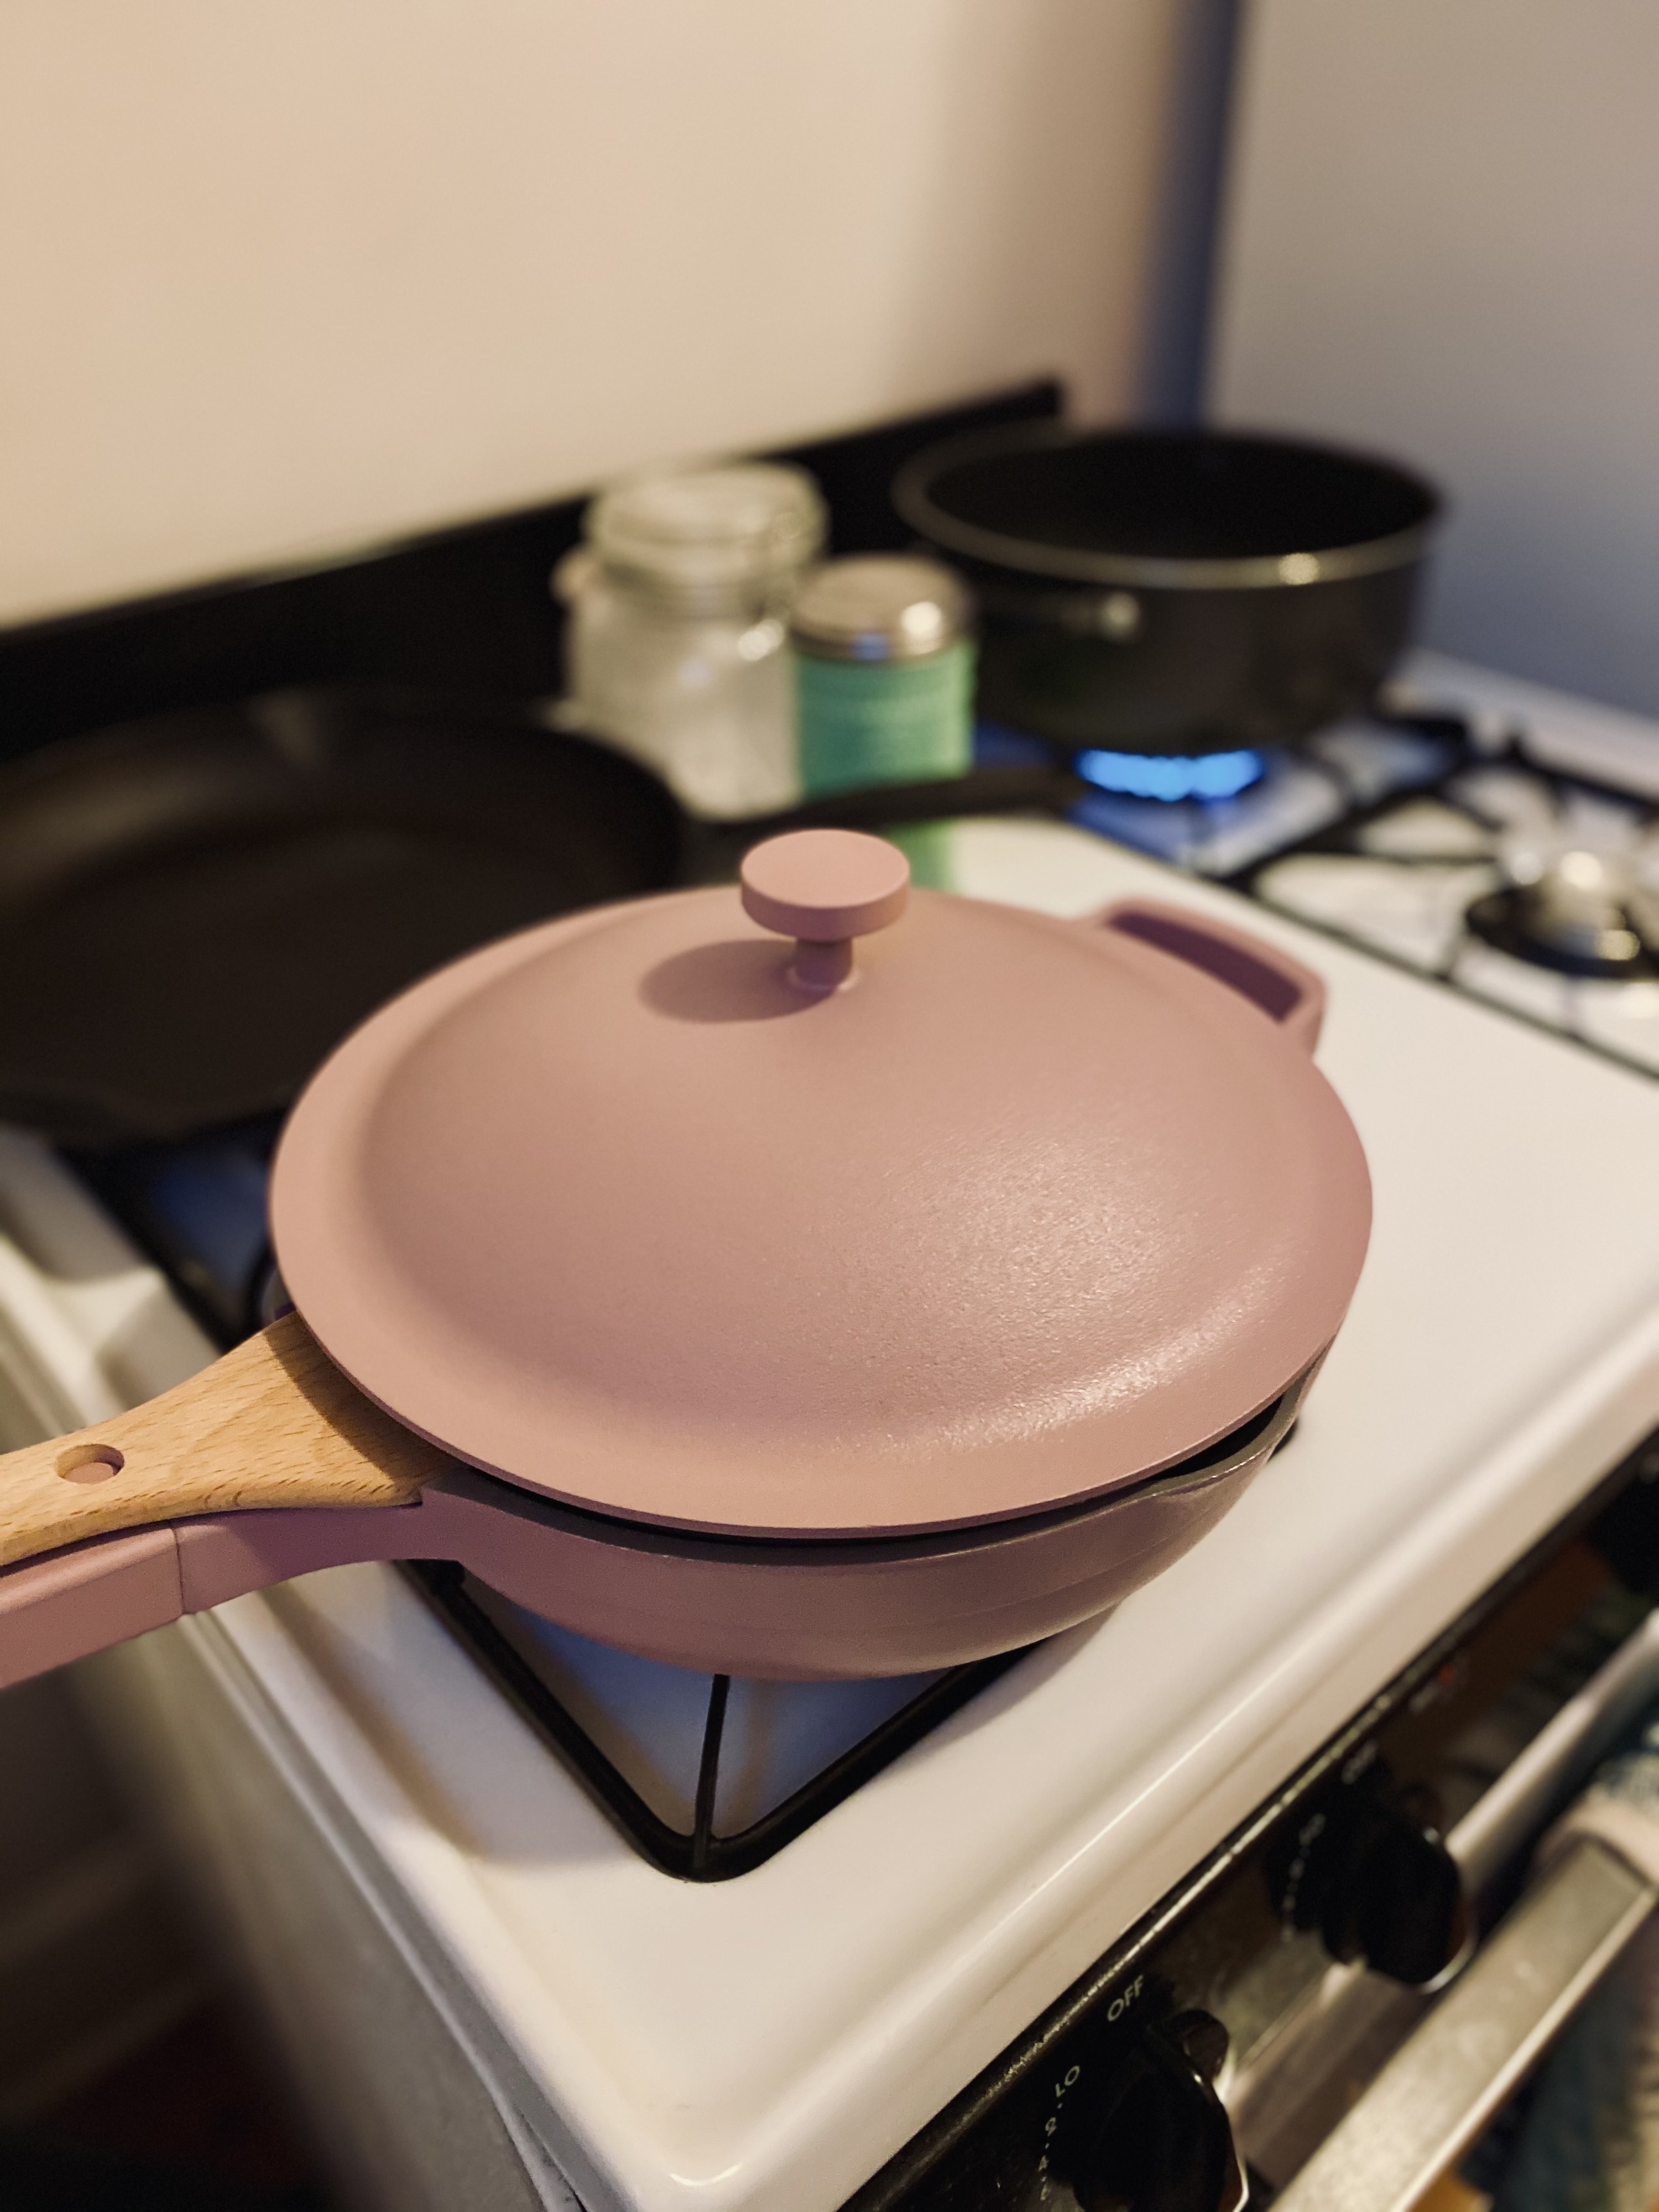 The Always Pan people just launched the Perfect Pot. Here's what I